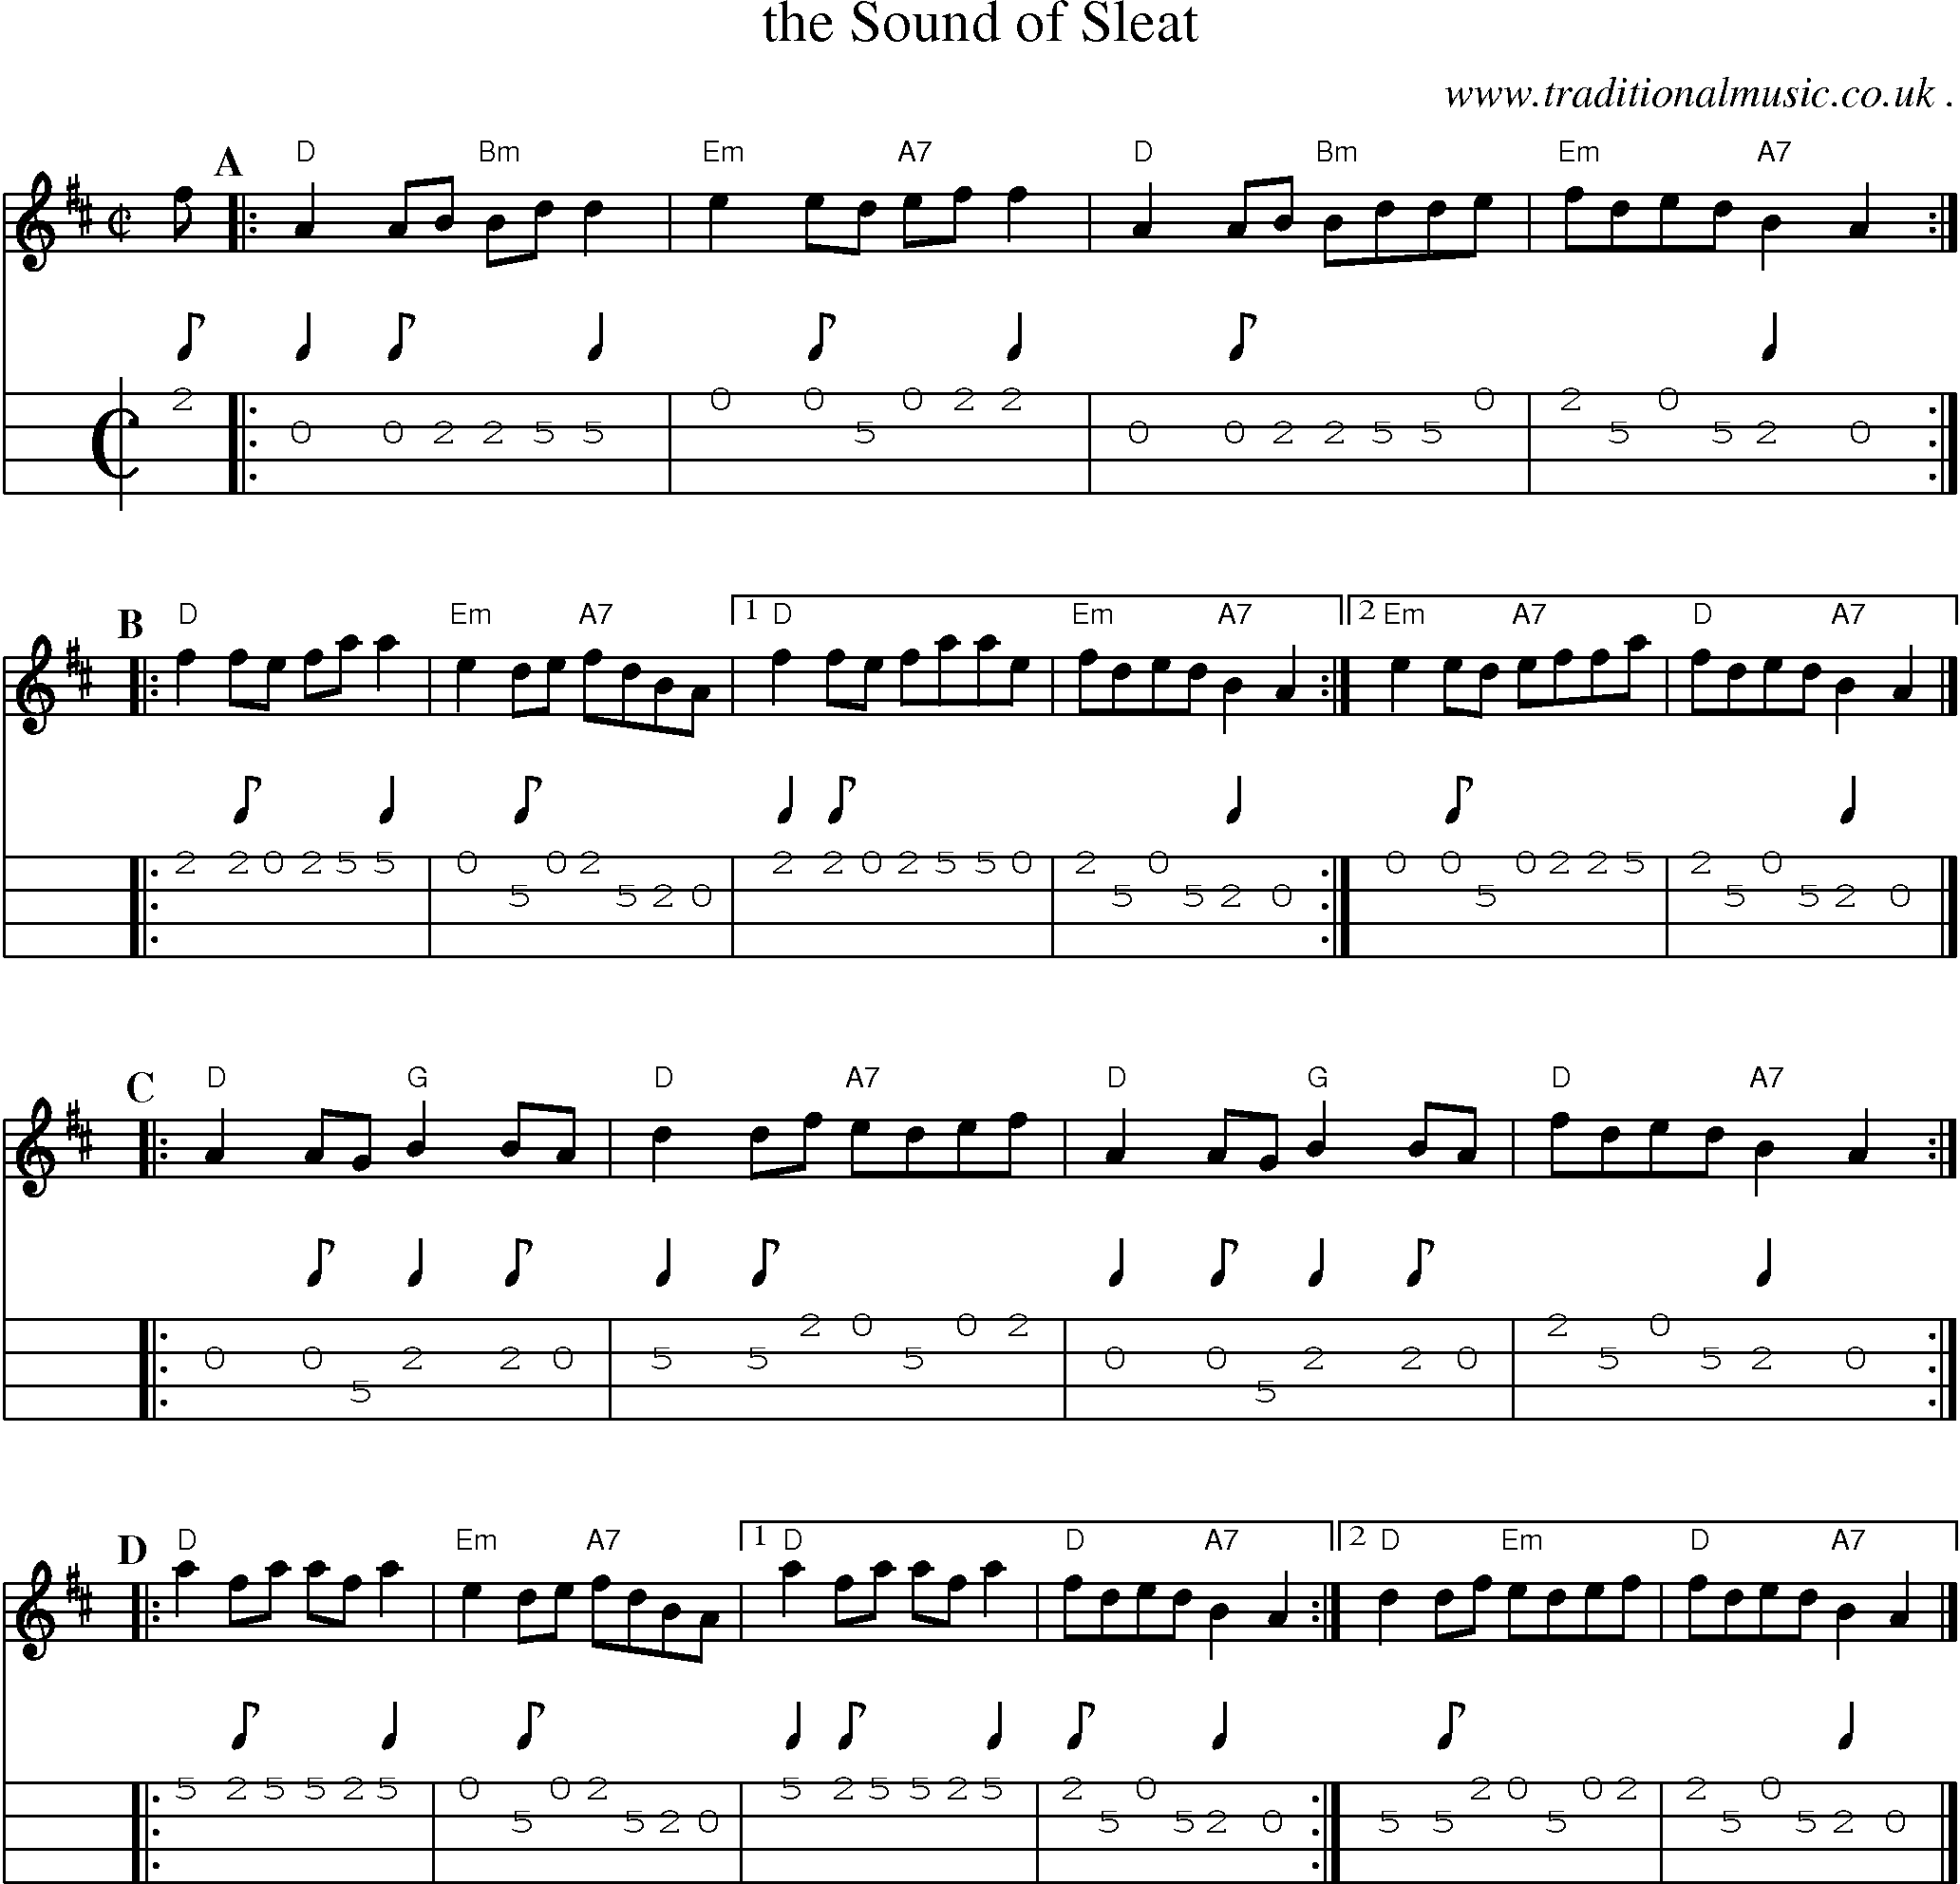 Sheet-music  score, Chords and Mandolin Tabs for The Sound Of Sleat